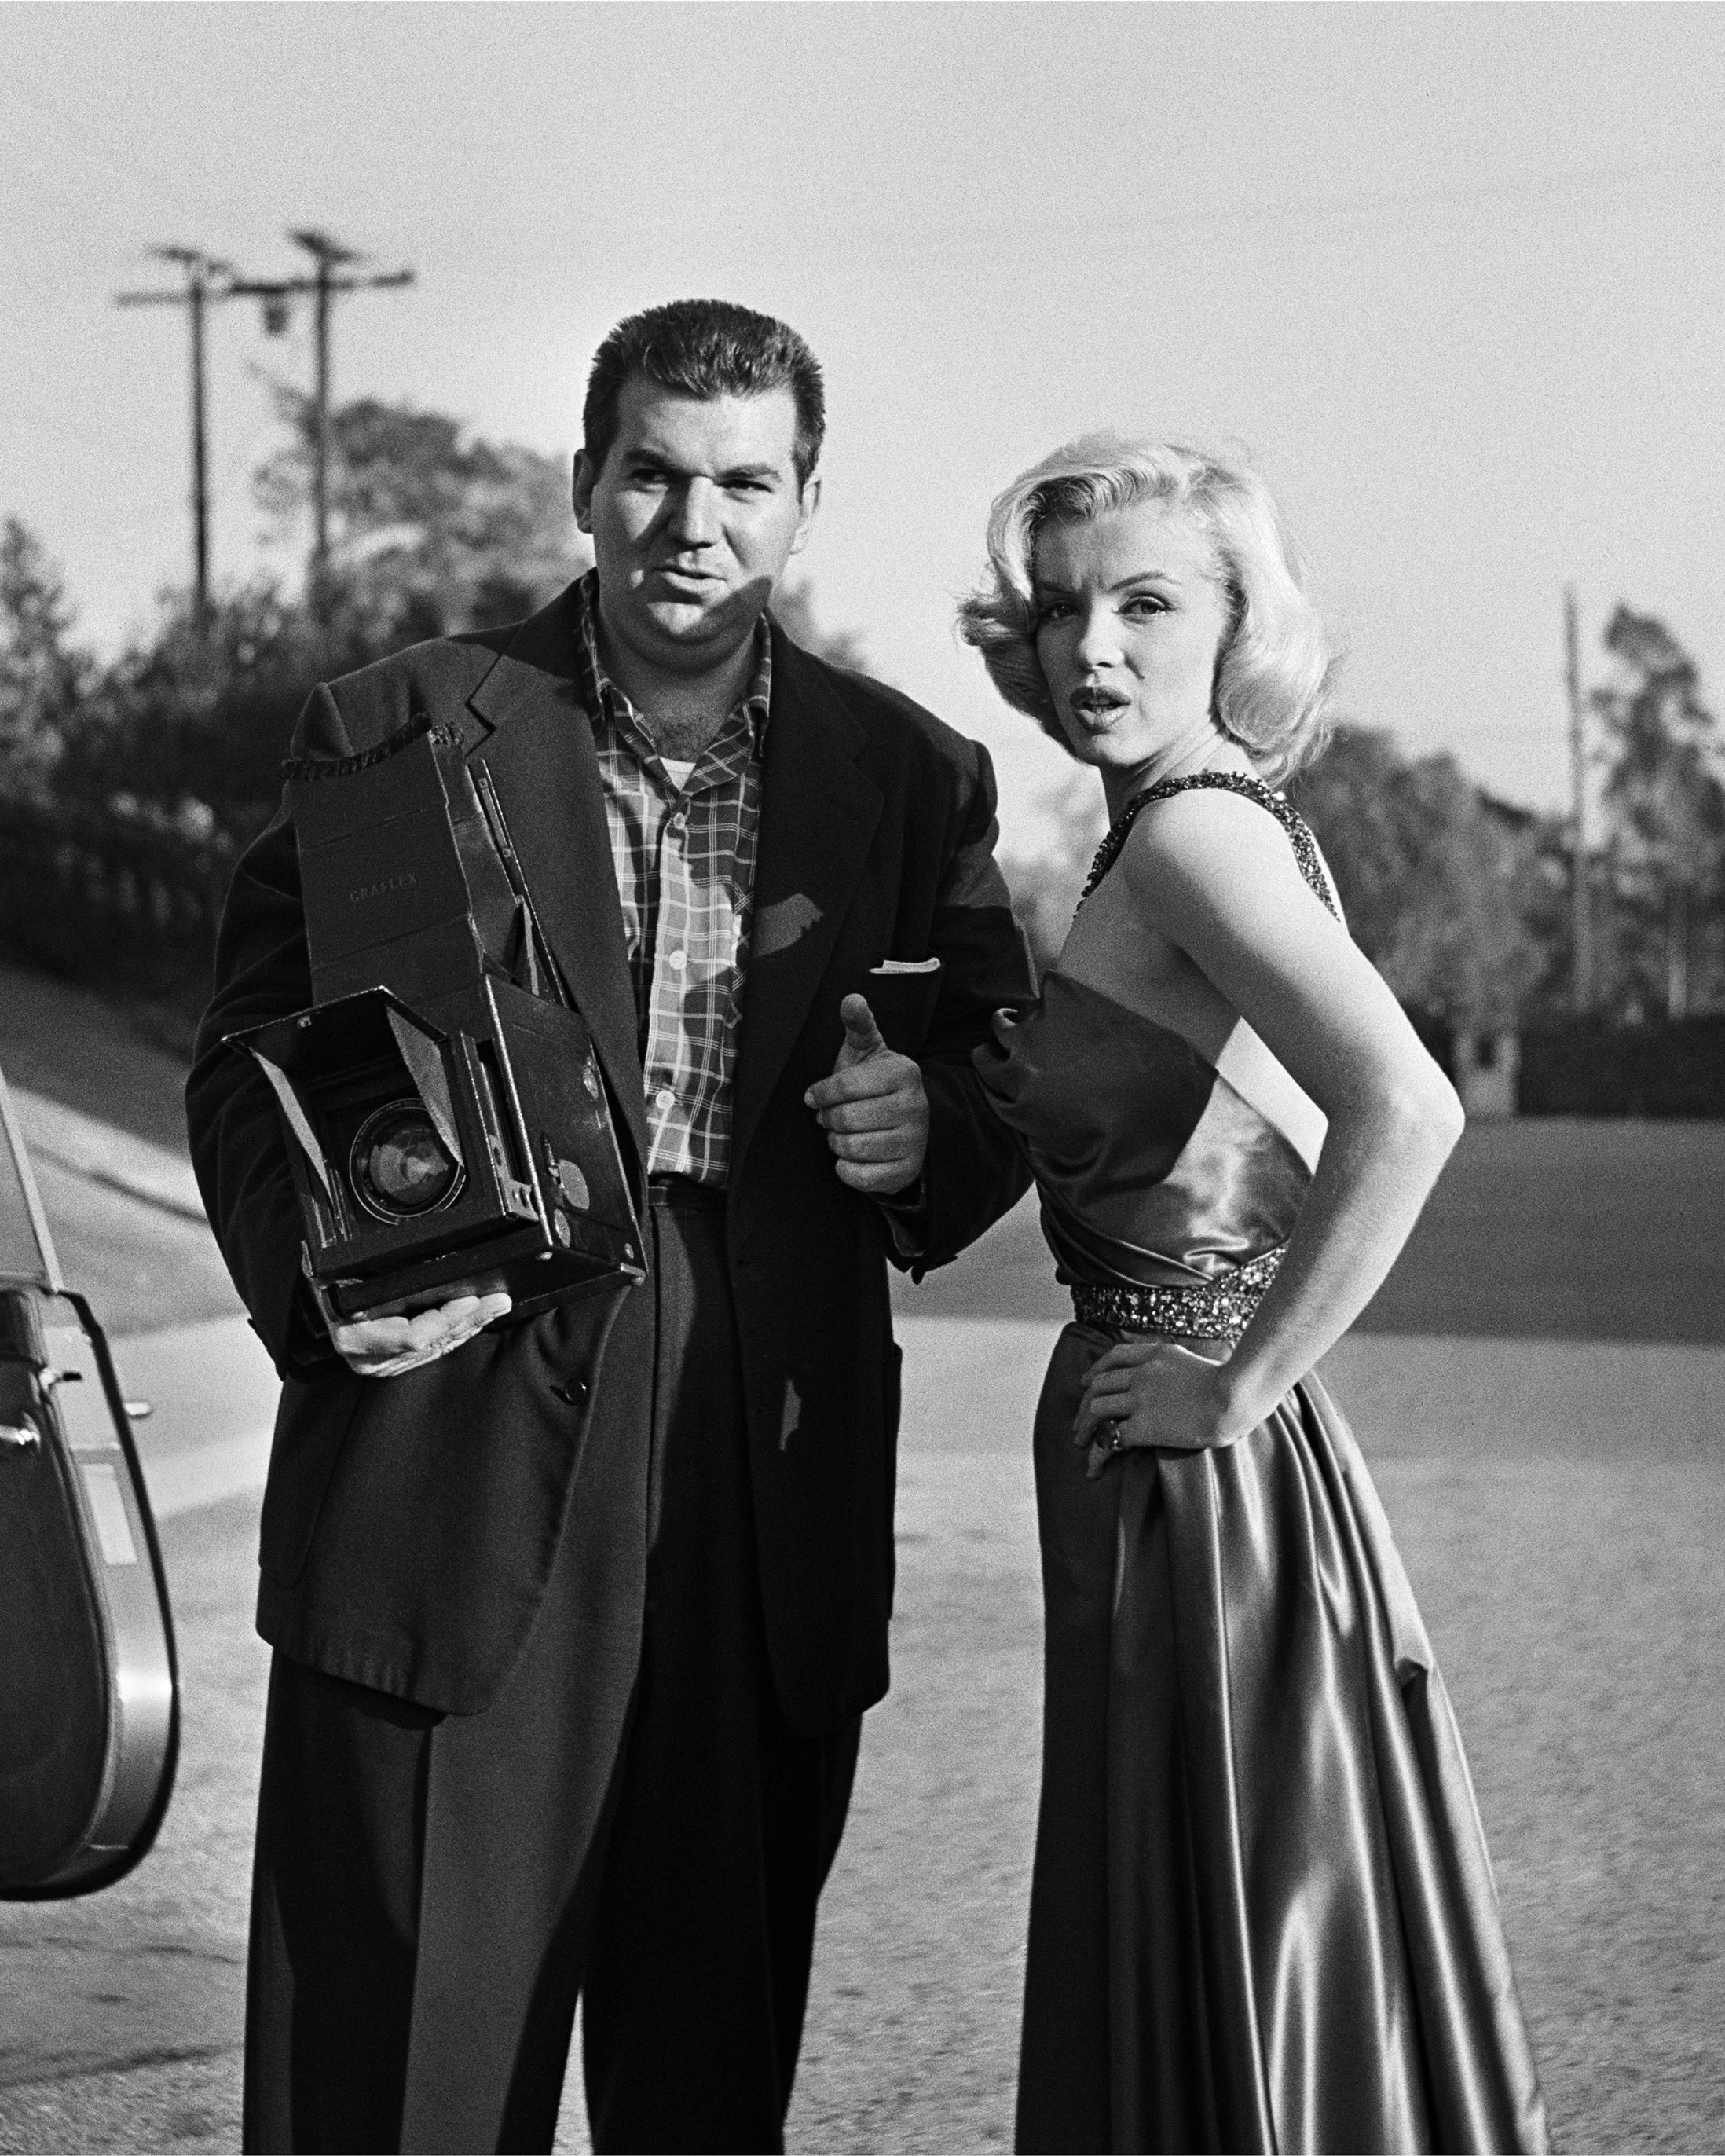 Frank Worth Black and White Photograph - Marilyn Monroe Standing with Photographer